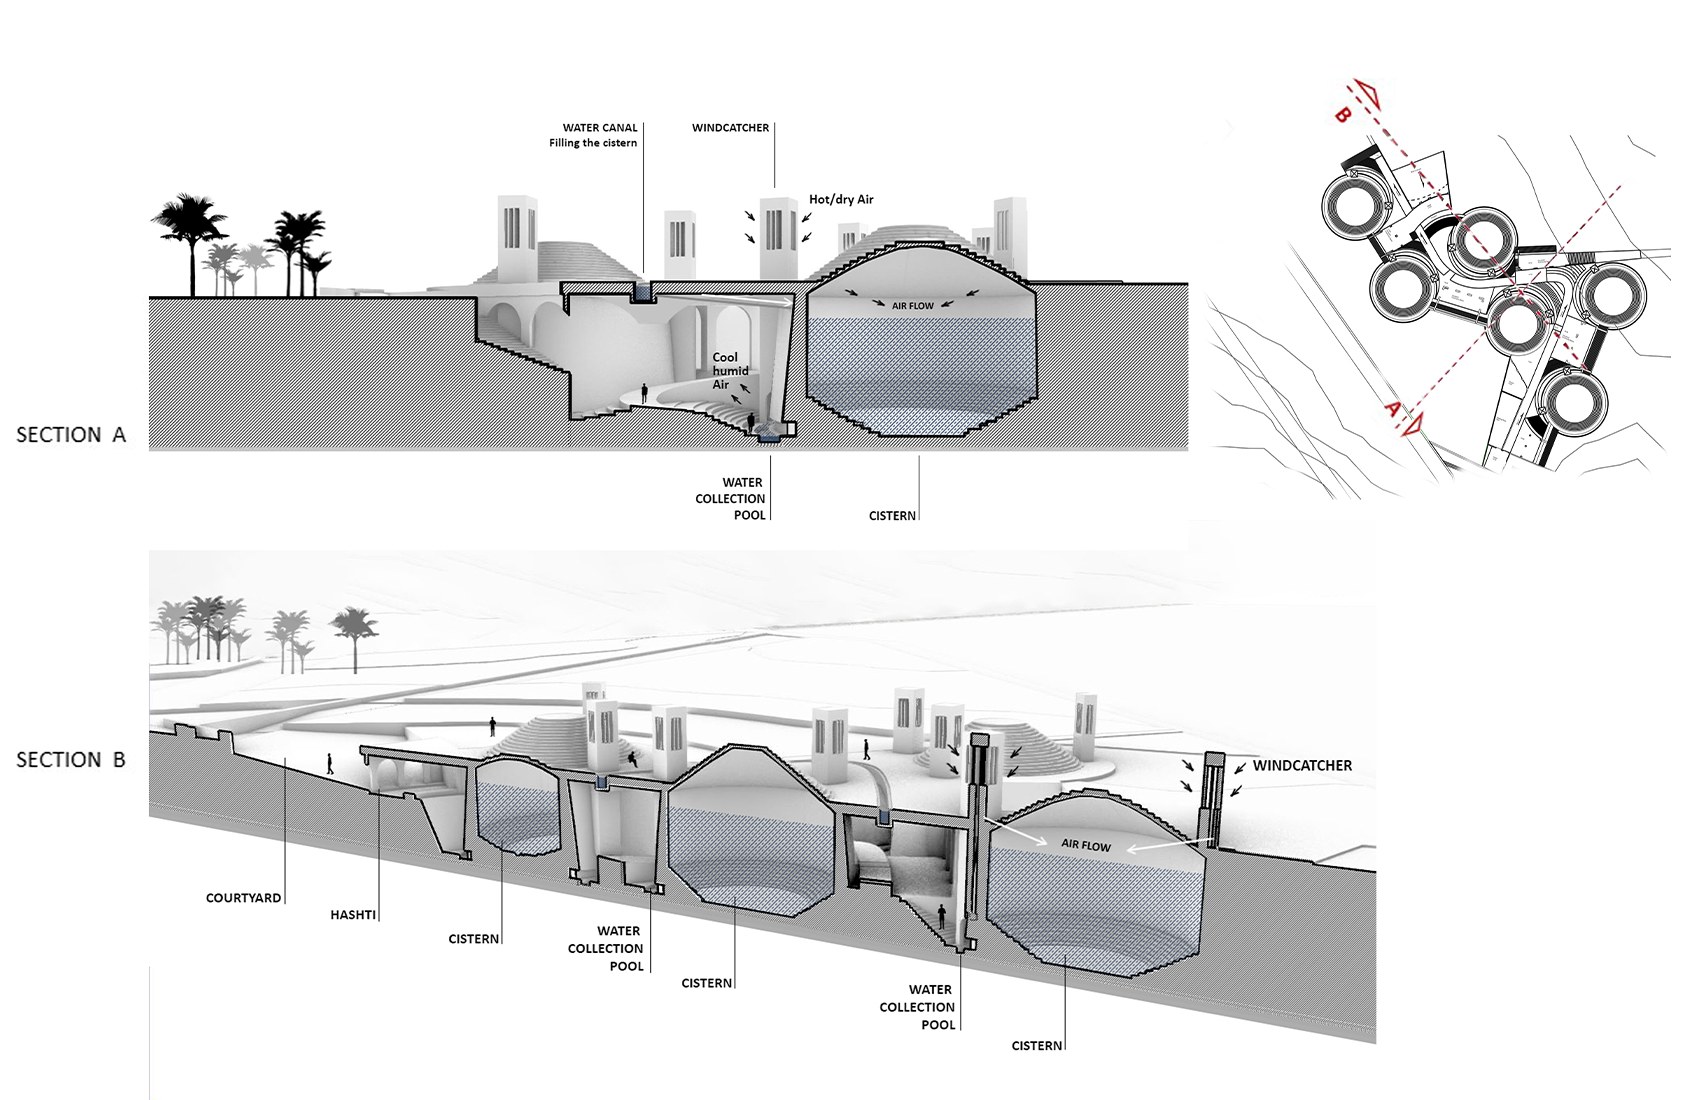 Azadeh Raoufi's thesis project water system section view